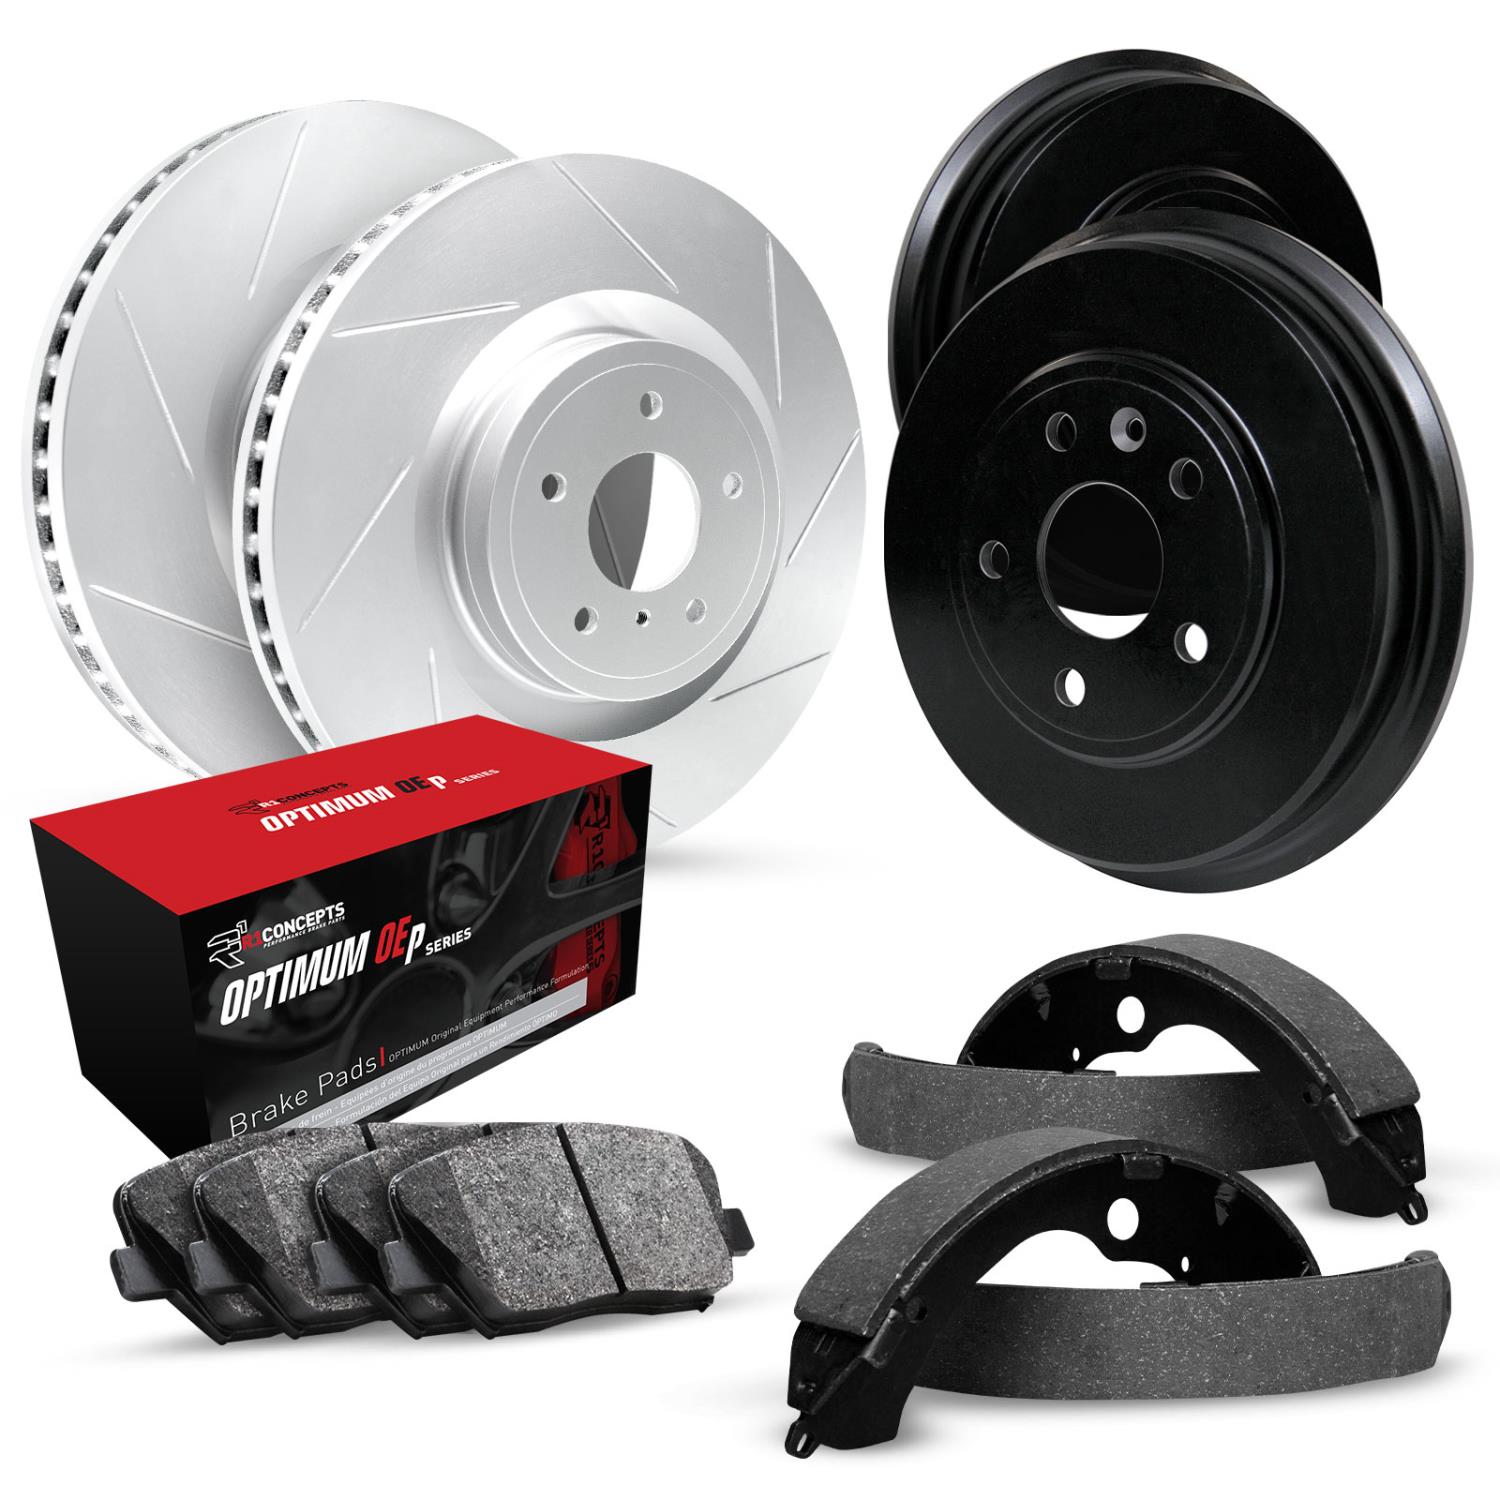 GEO-Carbon Slotted Brake Rotor & Drum Set w/Optimum OE Pads & Shoes, 1991-1992 Ford/Lincoln/Mercury/Mazda